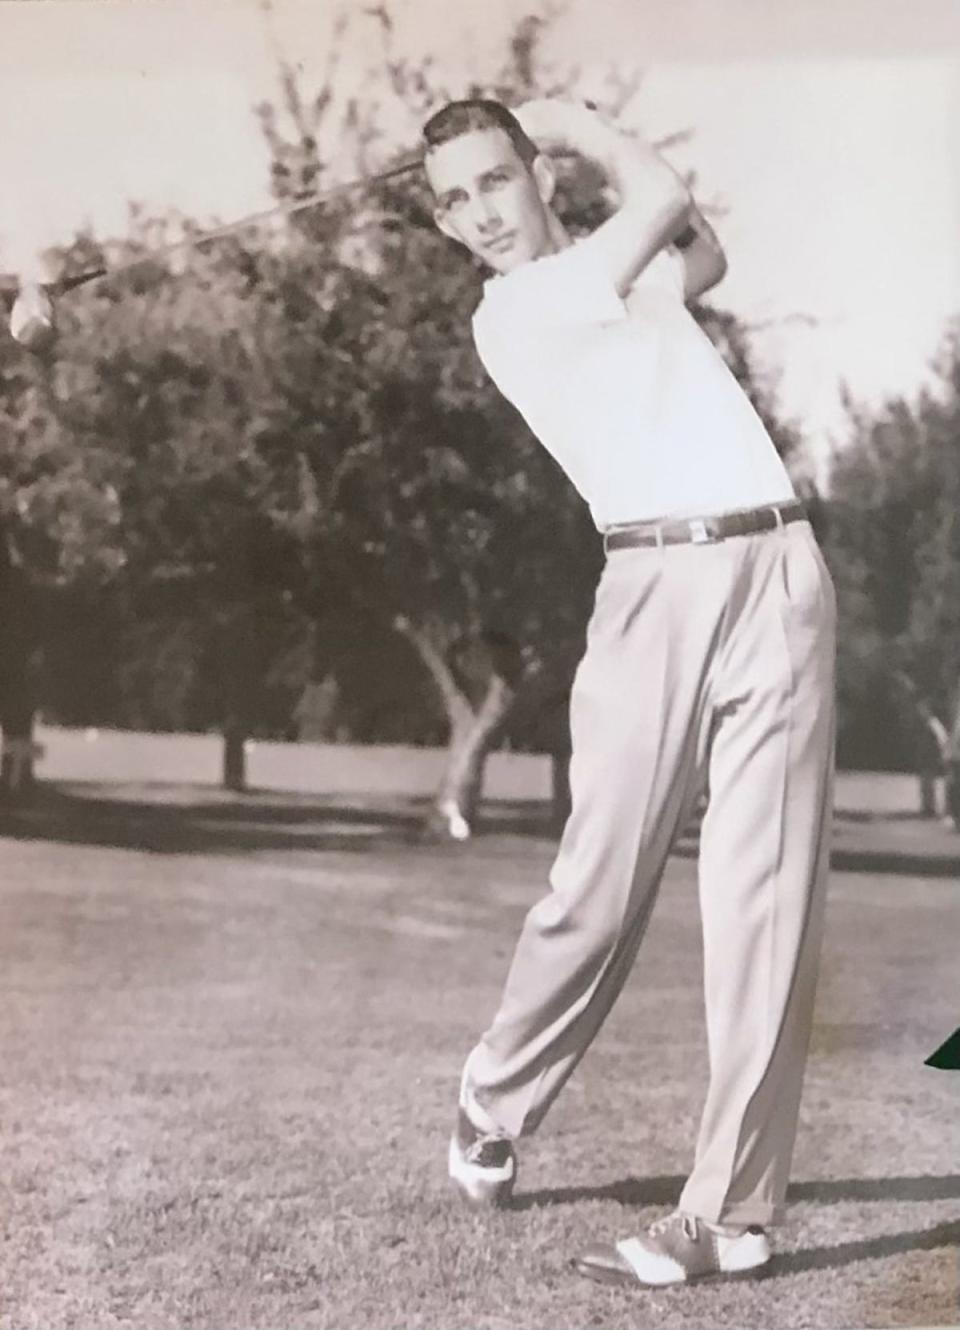 Buzz Edmonds first played golf as a high school student, and went on to win numerous tournaments and play in the inaugural U.S. Junior Amateur tournament, where he won the consolation bracket.